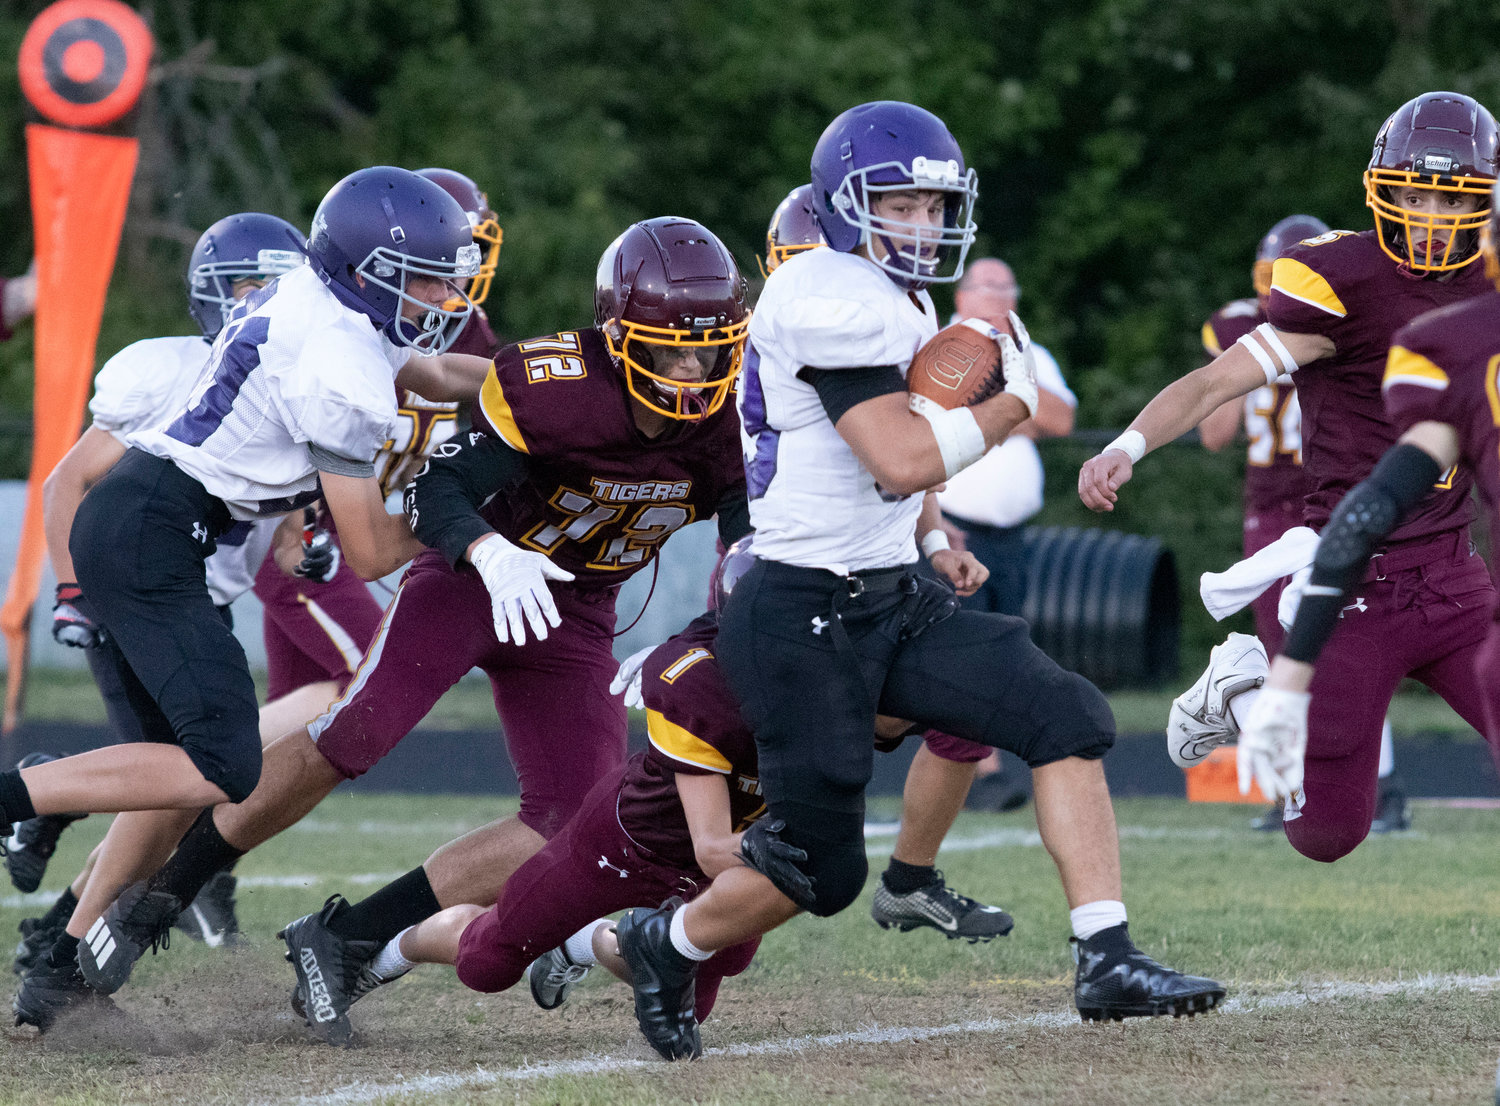 Brock Pacheco runs up the middle during the Huskies first scoring drive.